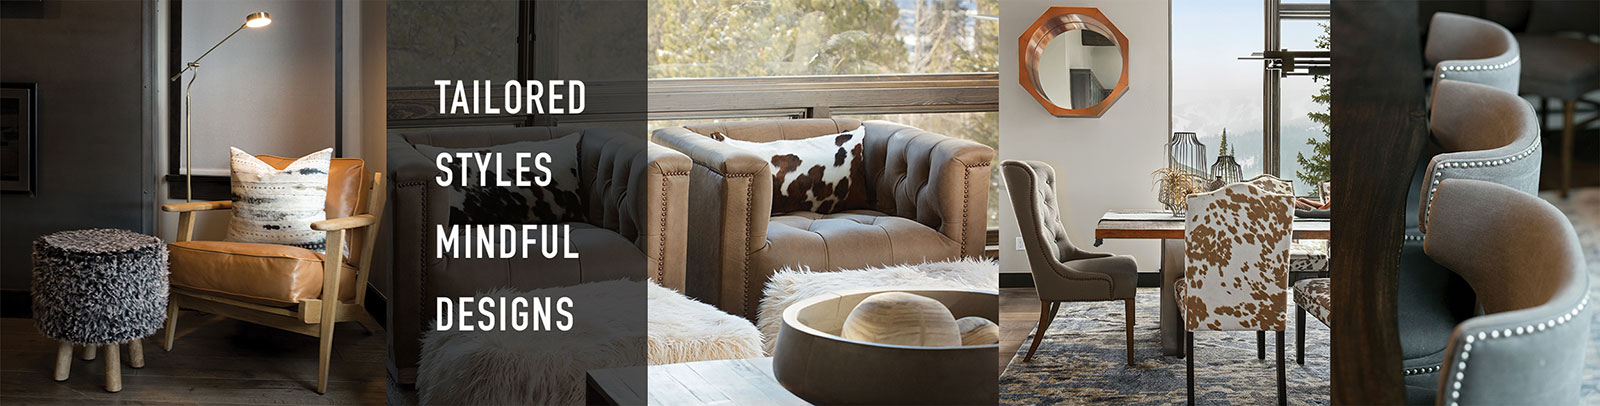 Tailored styes and mindful designs with cowhide furnishings, cozy leather chairs and custom decor